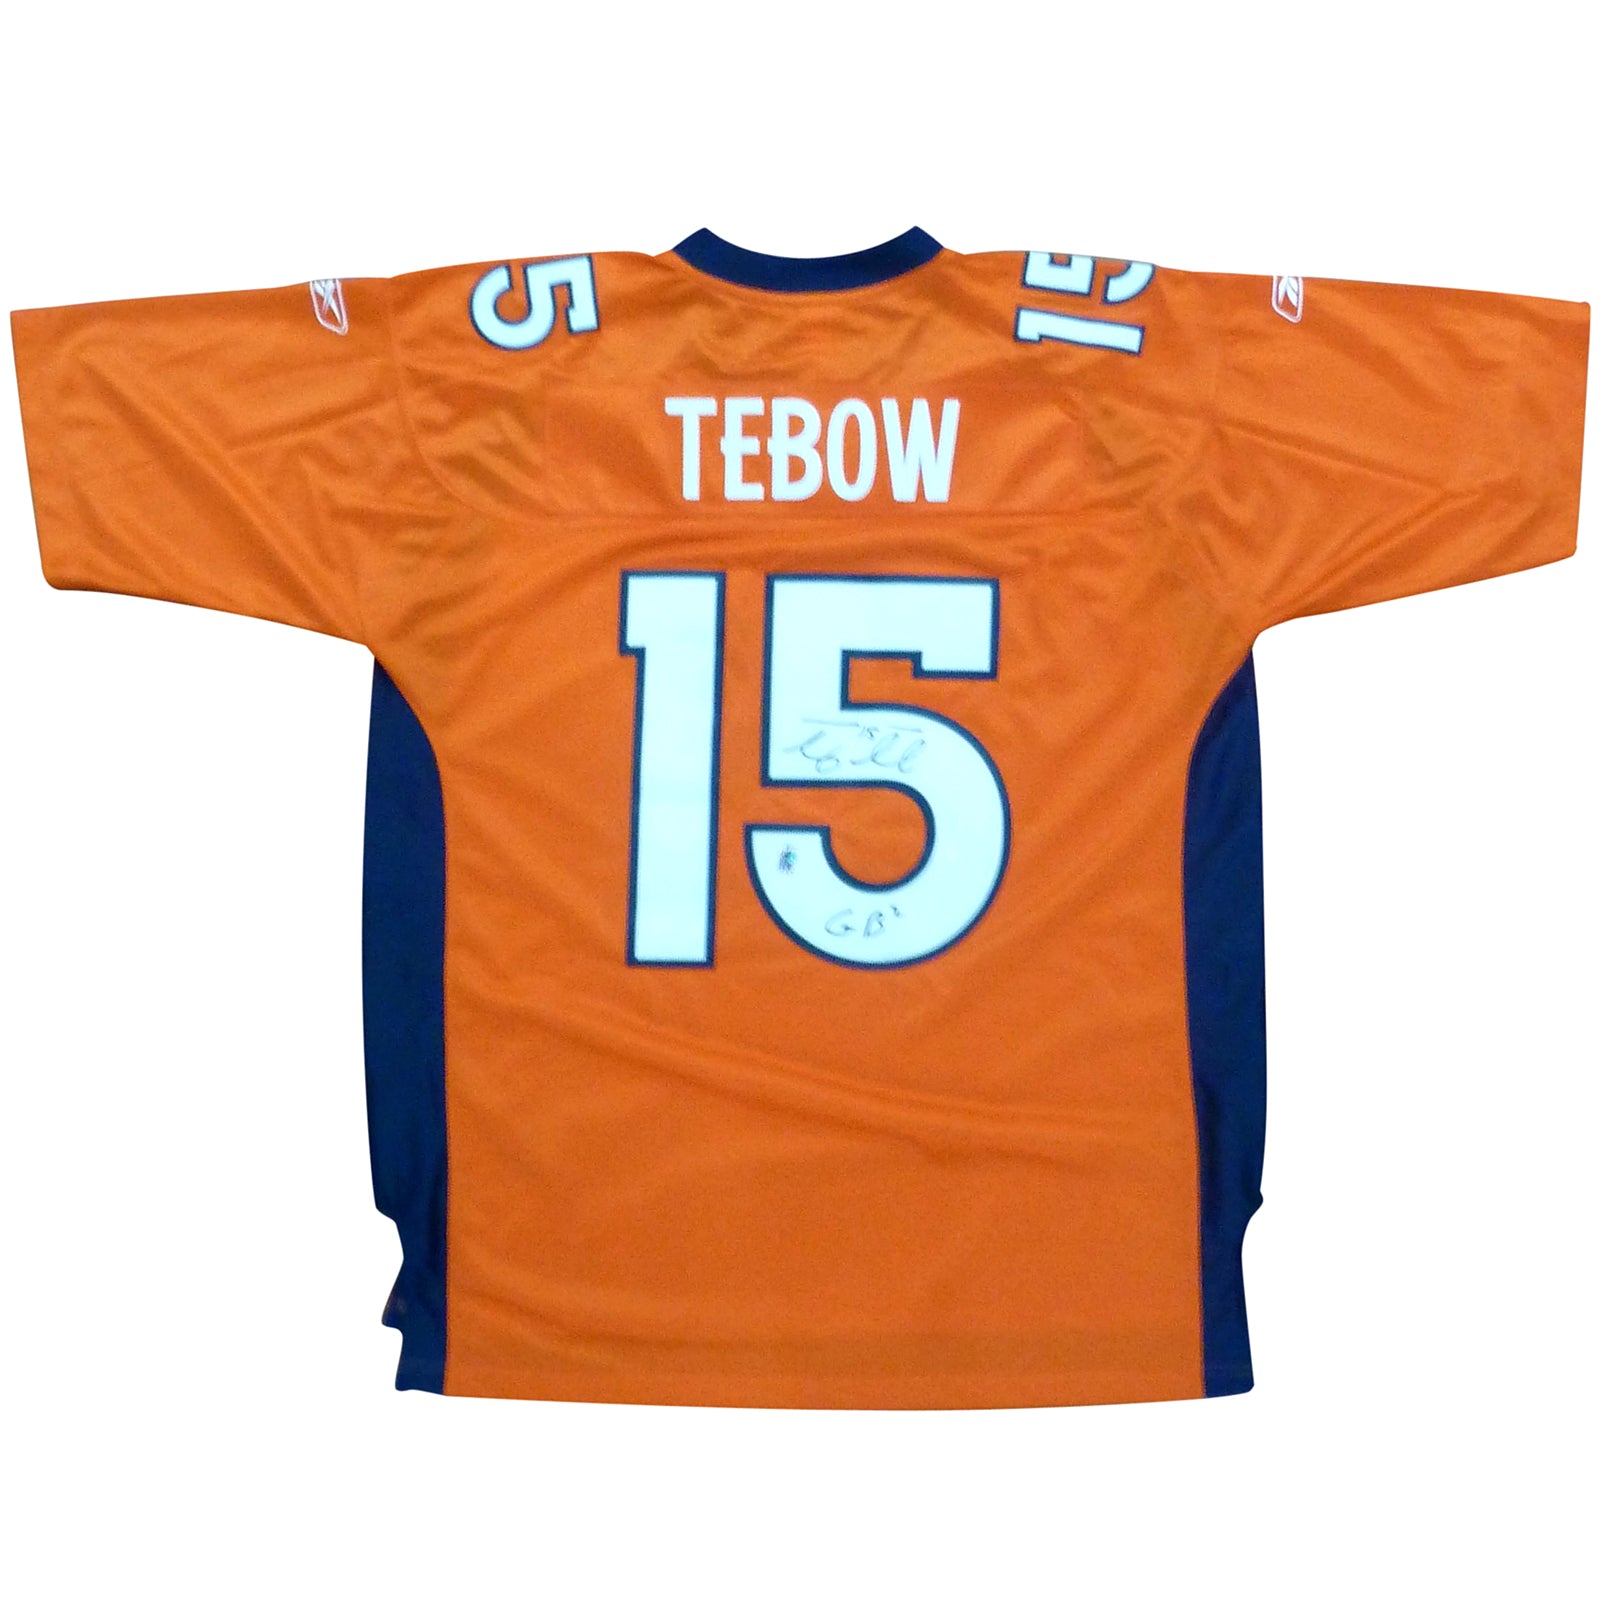 tebow mets jersey